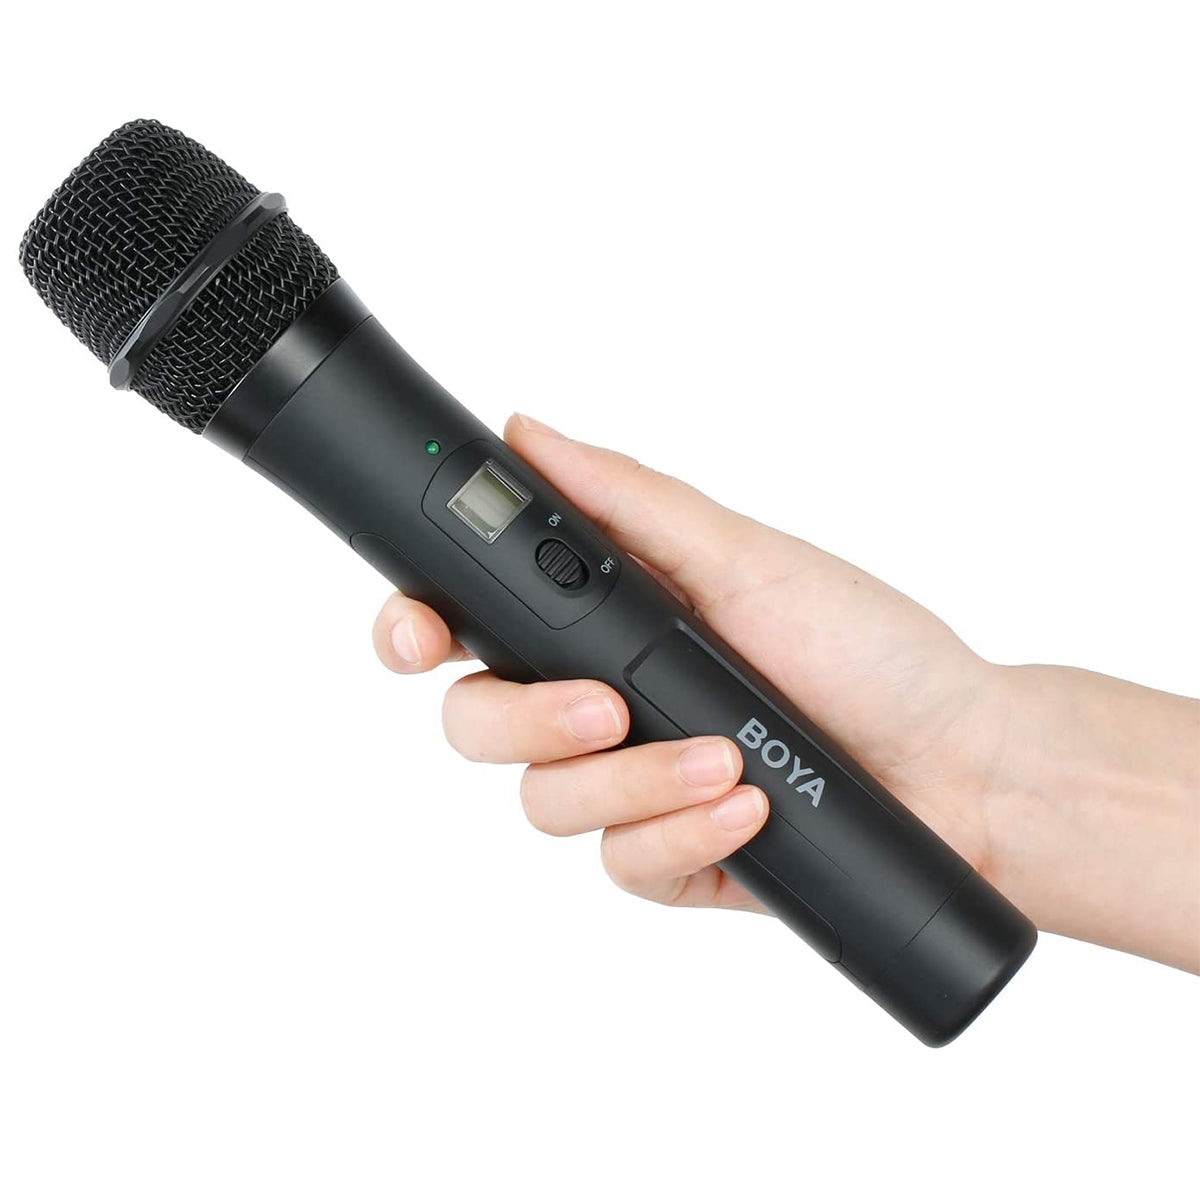 BOYA by-WHM8 Pro 48-Channel UHF Wireless Dynamic Handheld Cardioid Microphone Transmitter for by-WM8 Pro Series Microphone System for Interview Presentation Talk Show Speech